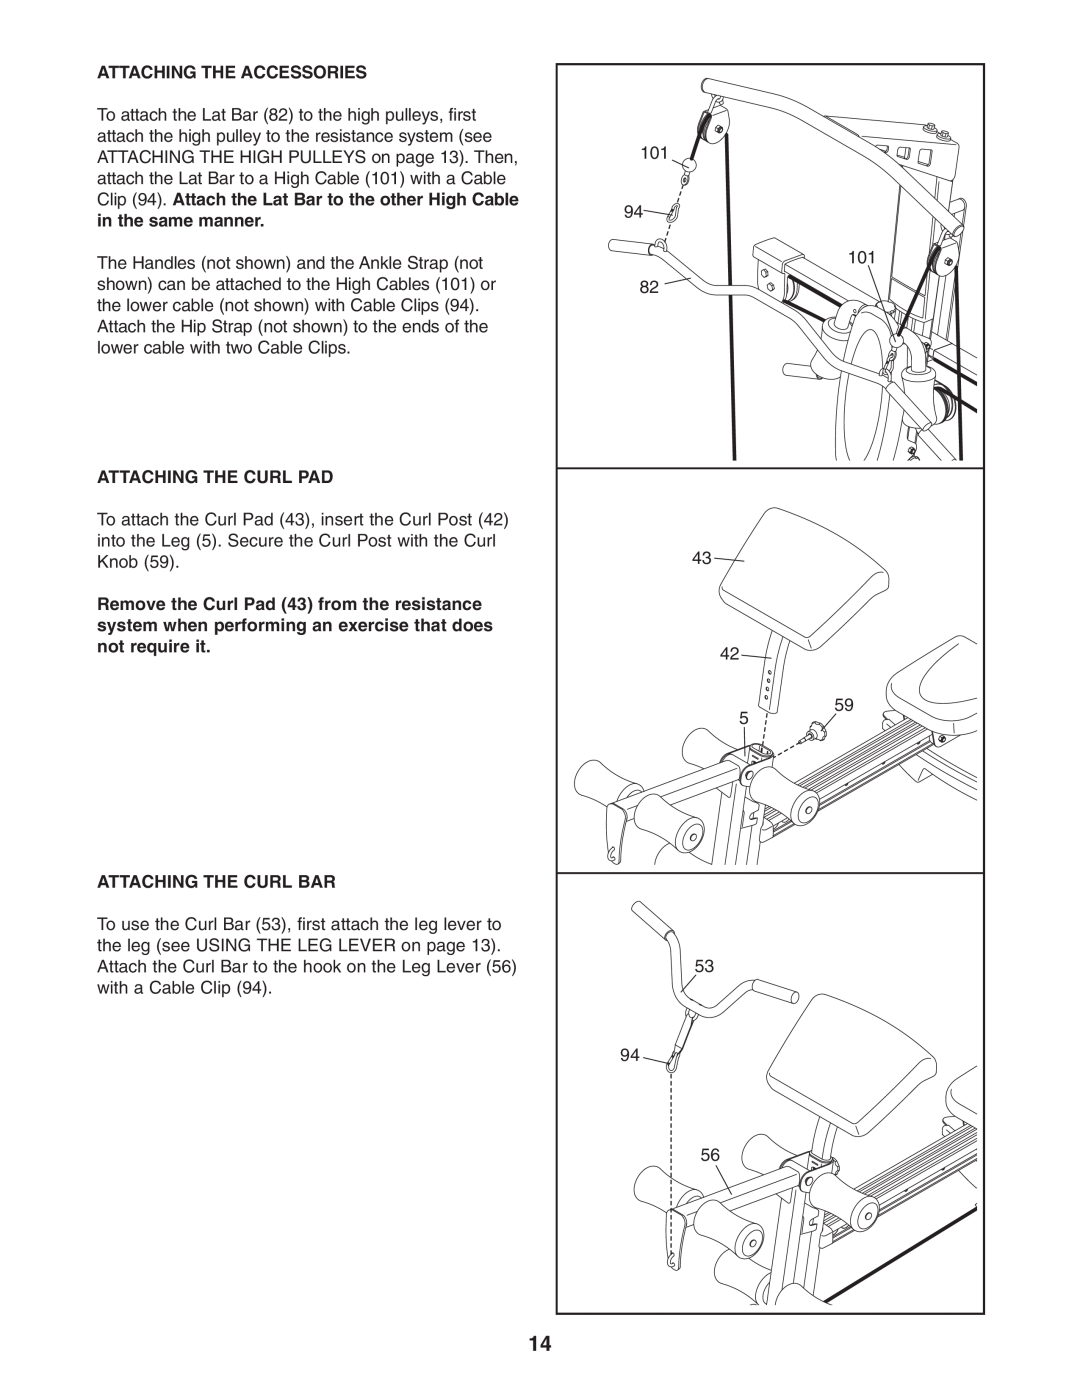 Weider WESY78734 user manual Attaching The Accessories, Attaching The Curl Pad, Attaching The Curl Bar 